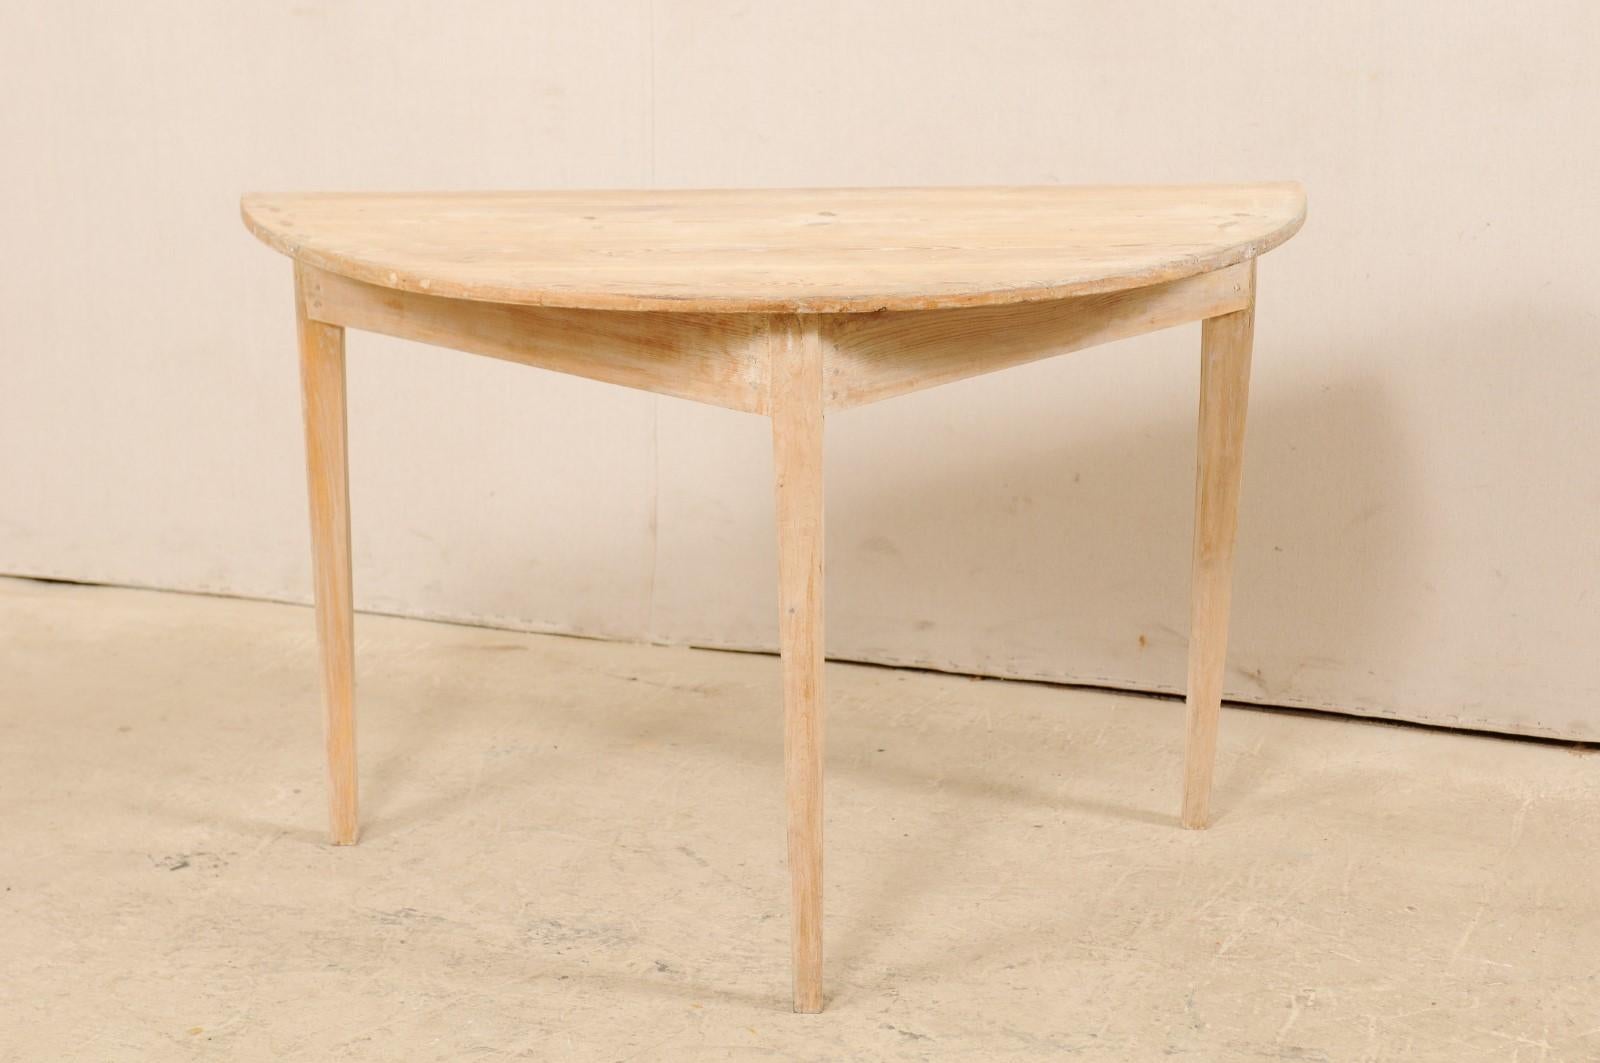 A 19th century single Swedish wood demilune table. This antique table from Sweden features a semi-circular, or half moon top, over a triangular shaped apron. The skirt is clean and plain, and the piece is raised upon three squared and gently tapered